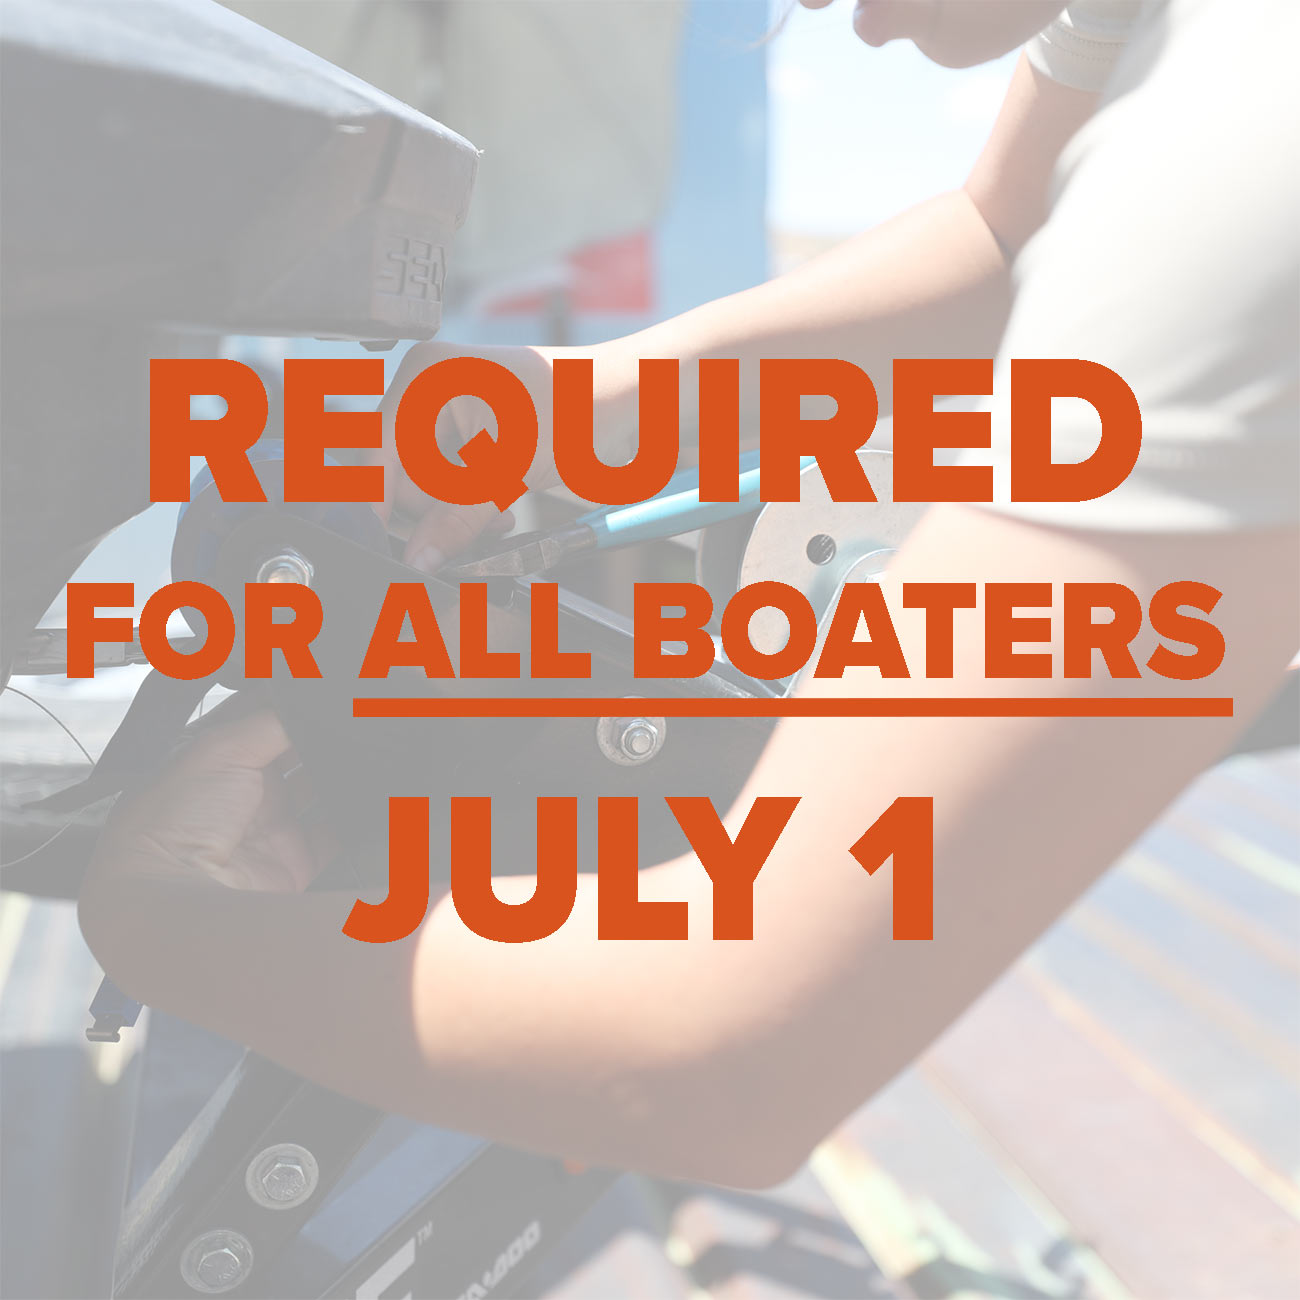 Note: All boaters are required to take this course after July 1, 2023